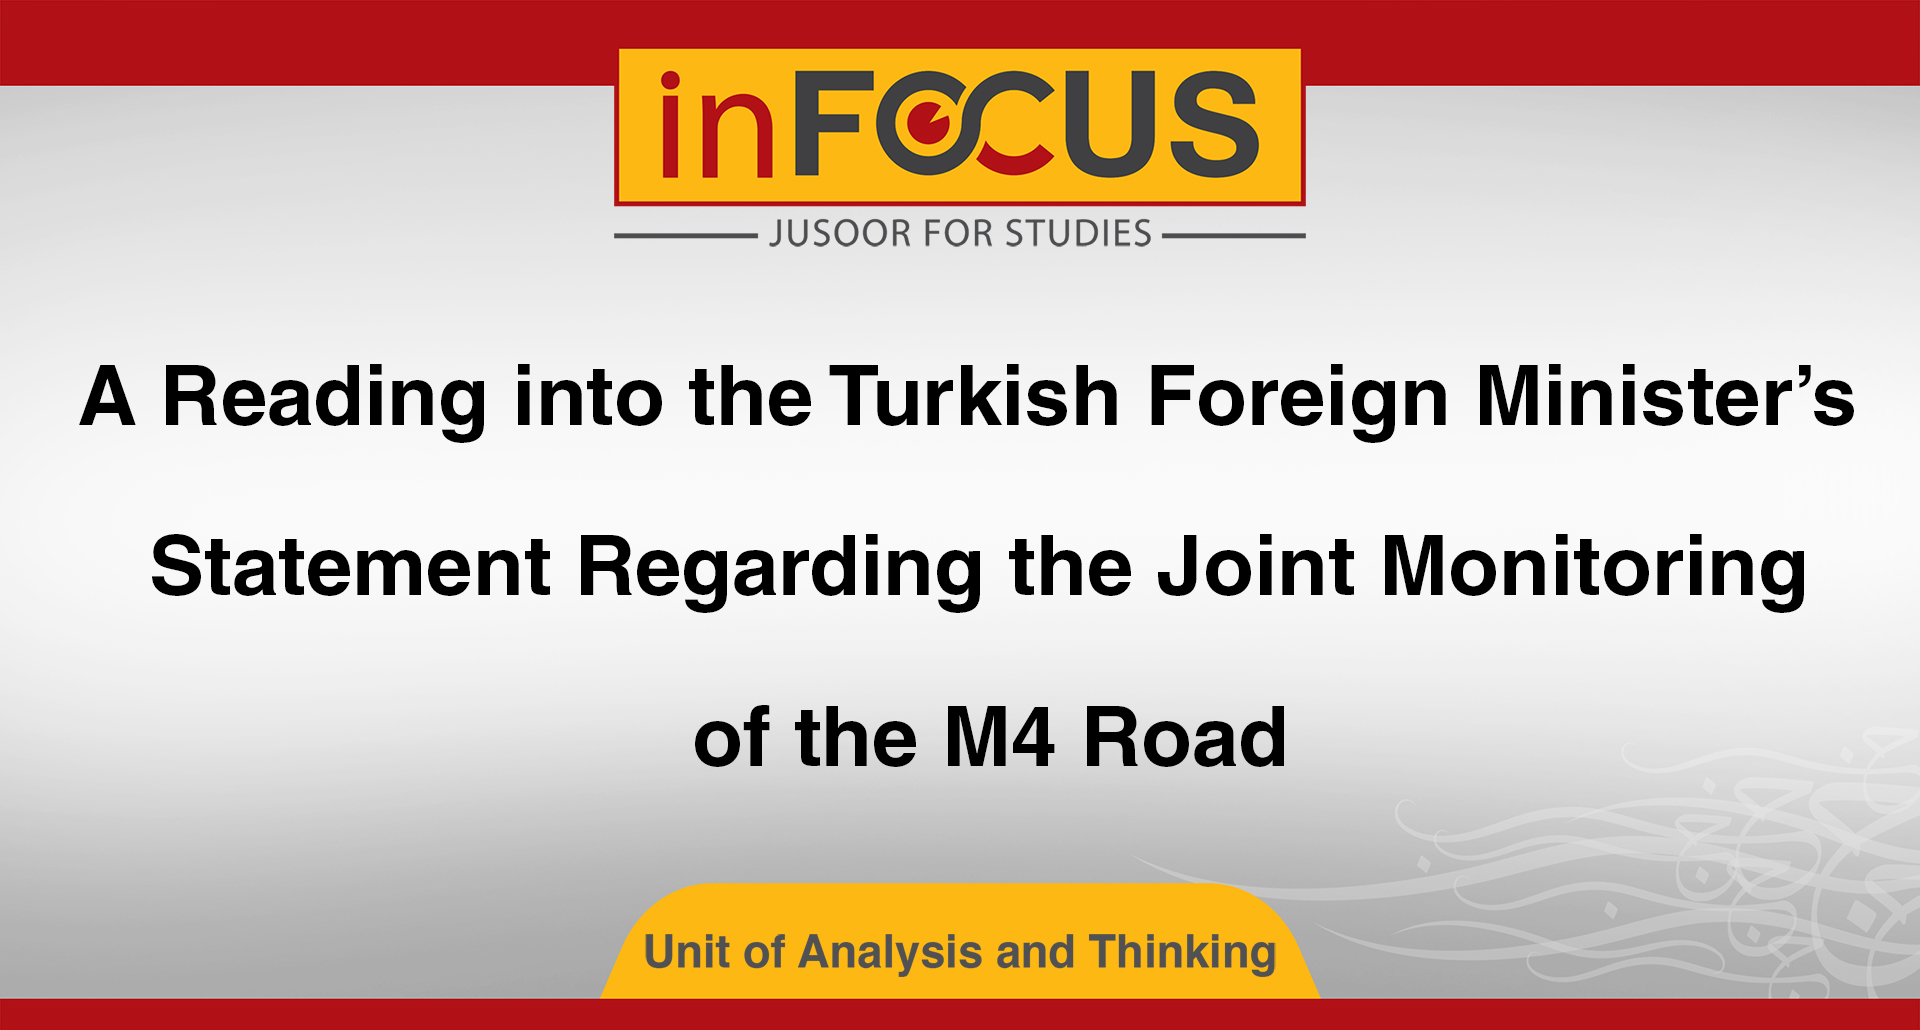 A Reading into the Turkish Foreign Minister’s Statement Regarding the Joint Monitoring of the M4 Road